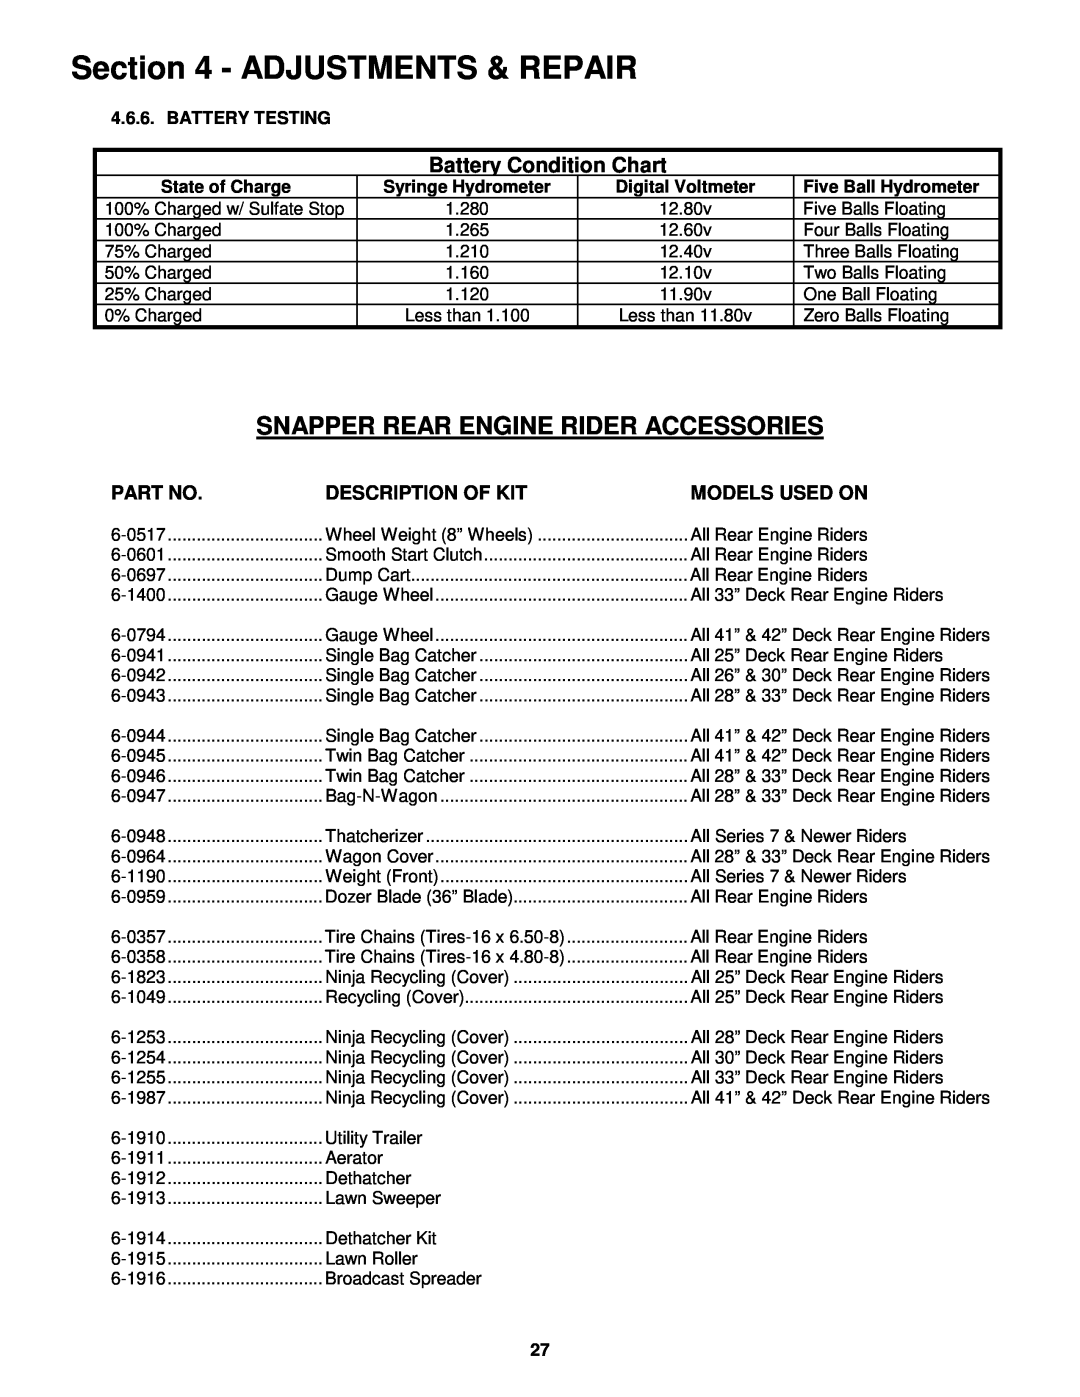 Snapper Snapper Rear Engine Rider Accessories, Adjustments & Repair, Battery Condition Chart, Description Of Kit 